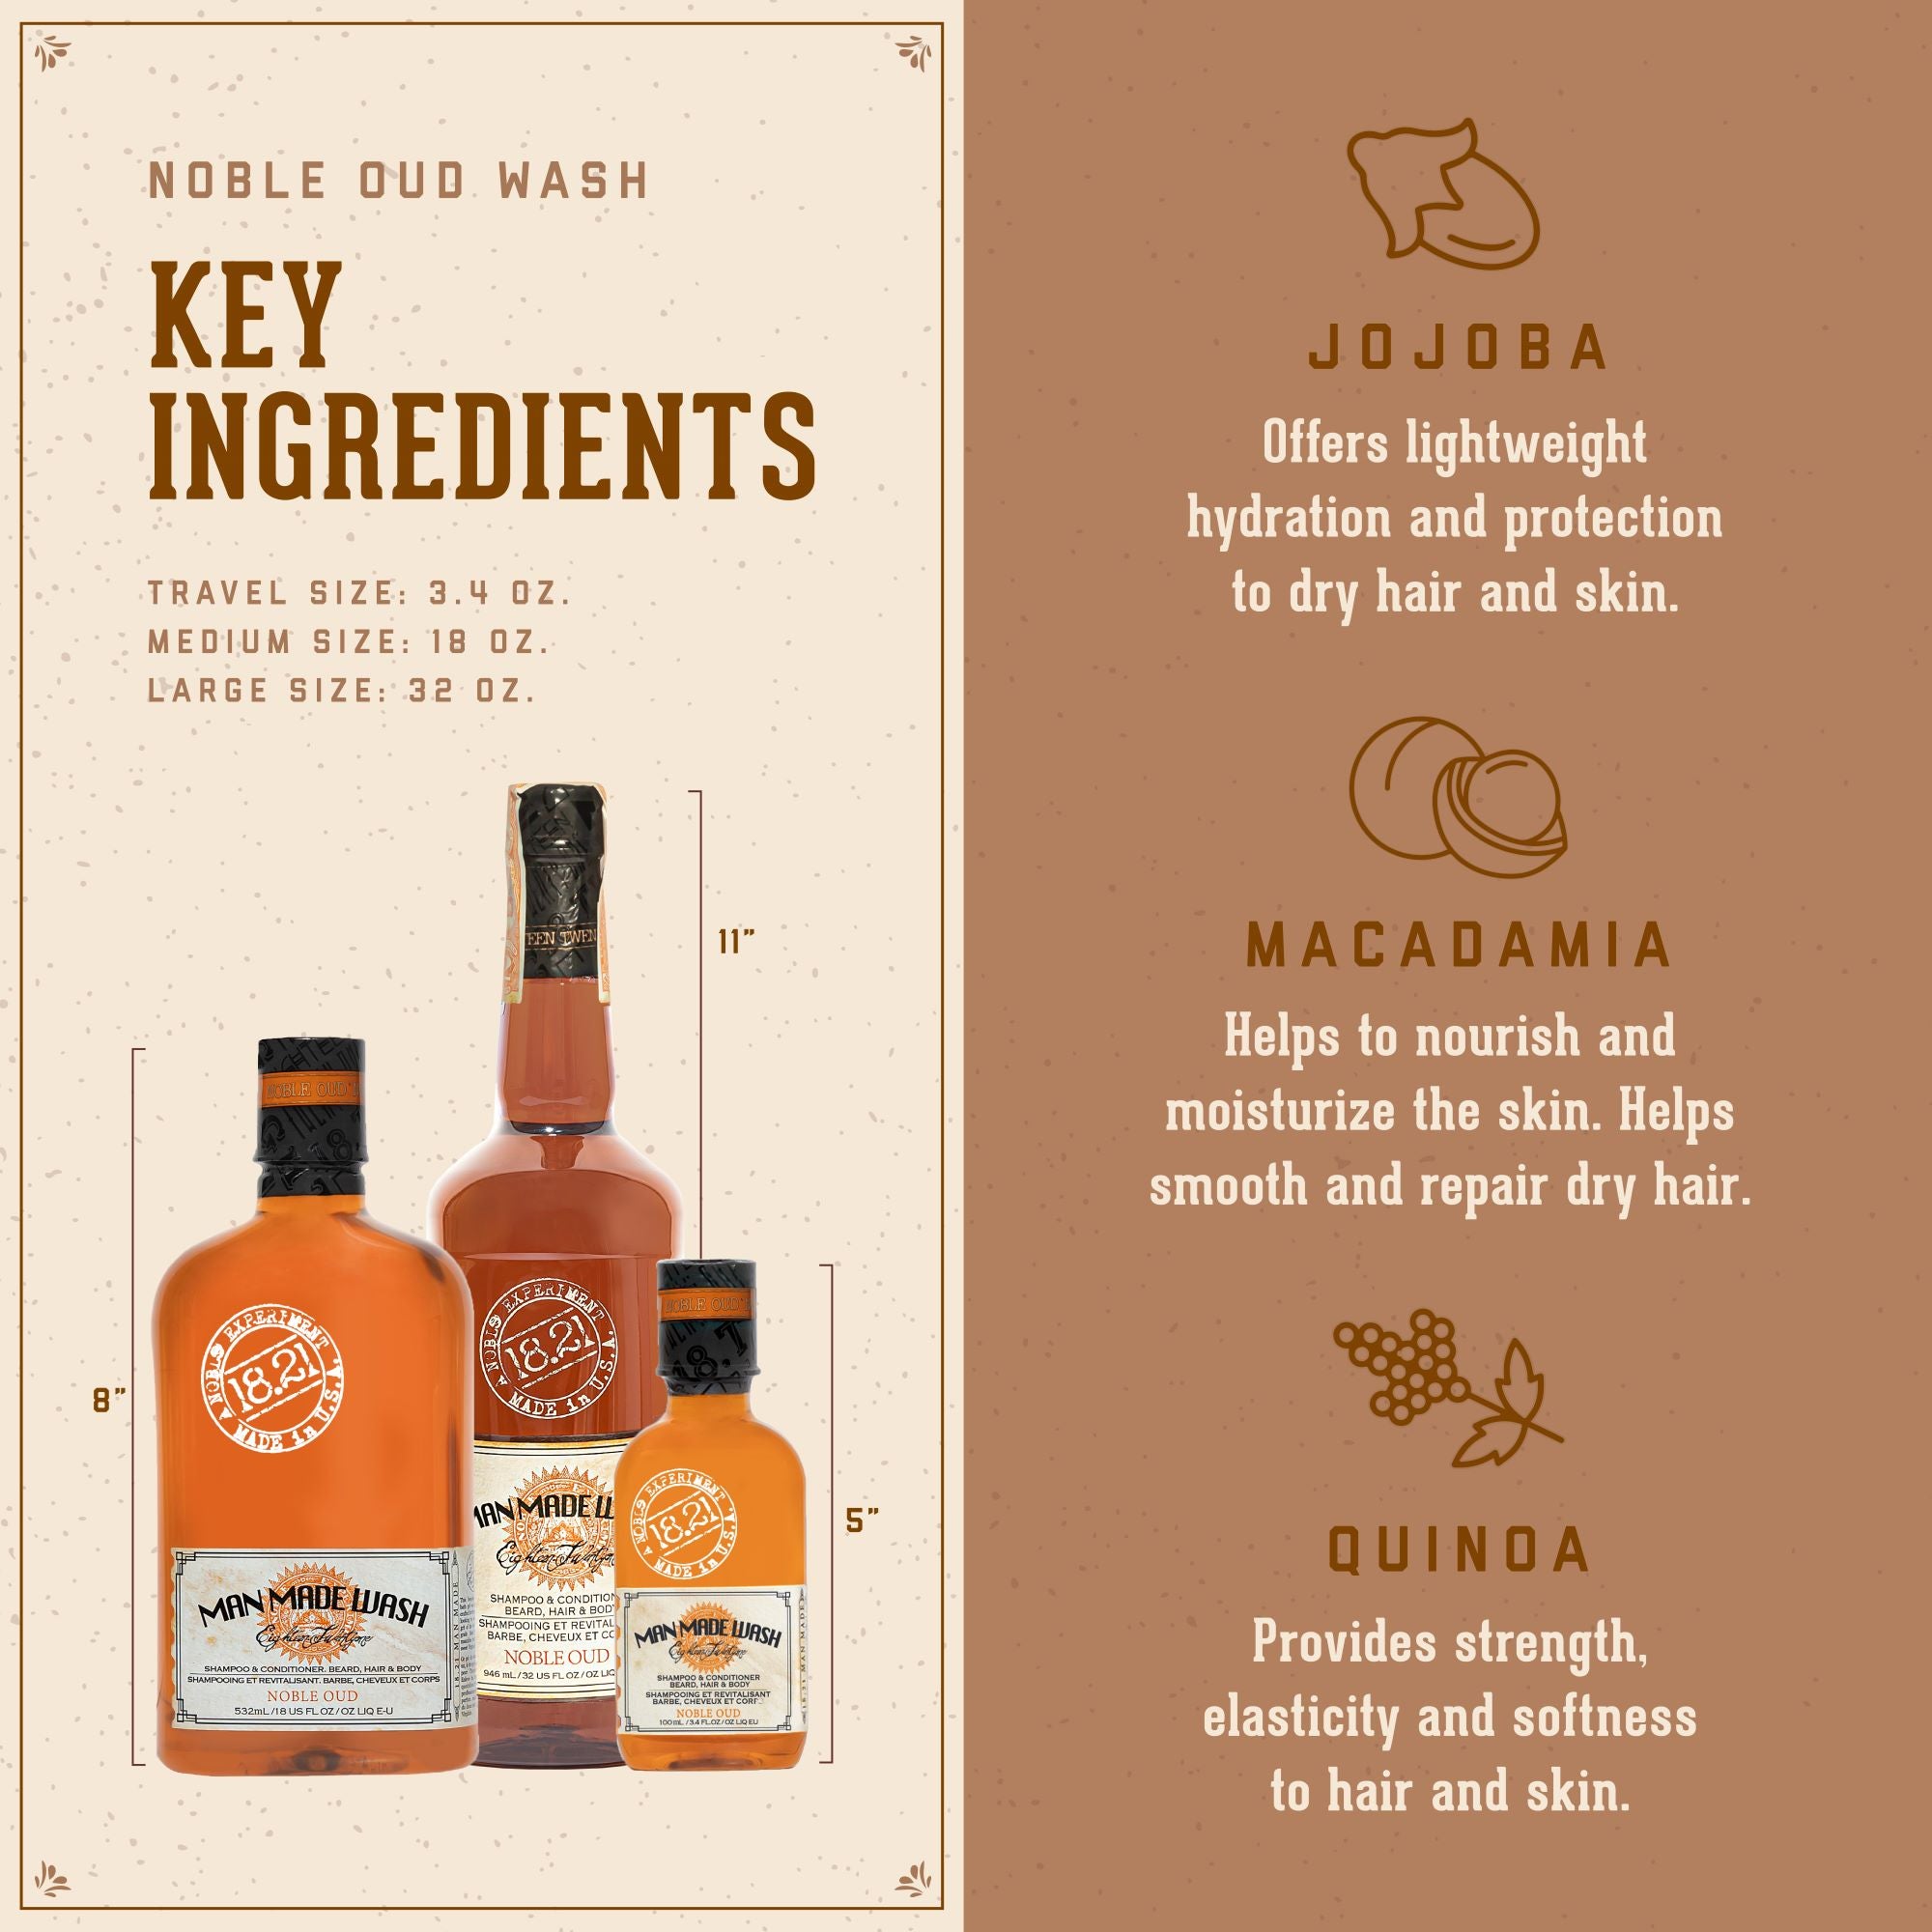 18.21 Man Made Wash Key Ingredients: Jojoba: offers lighweight hydration and protection to dry hair and skin. Macademia: helps nourish and moisturize the skin. Helps smooth and repair dry hair. Quiona: provides strenght elasticity, and softness to hair and skin